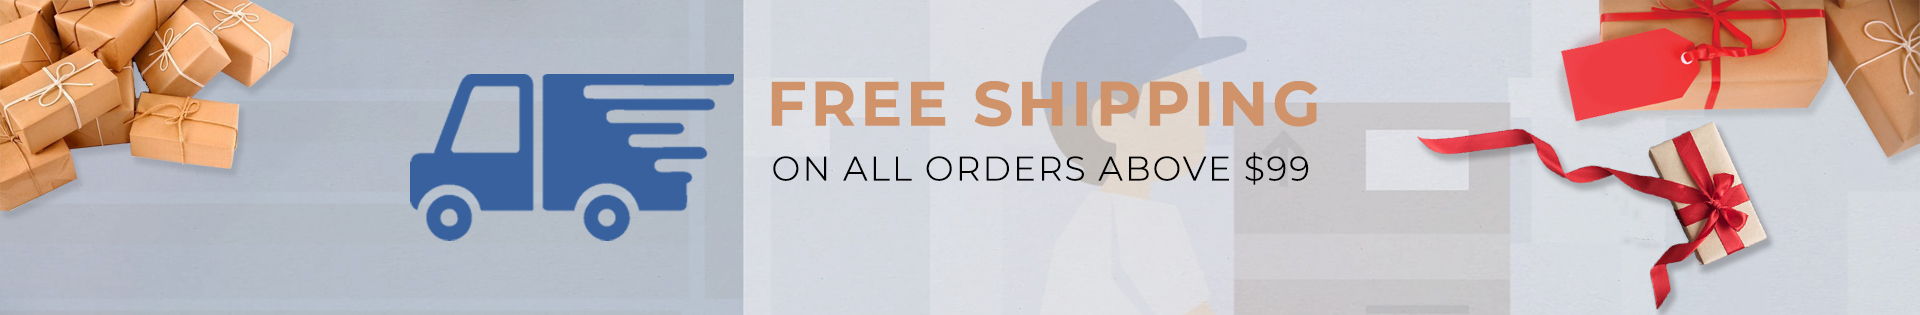 Bear Wellness: Free Shipping on All Orders Above $99